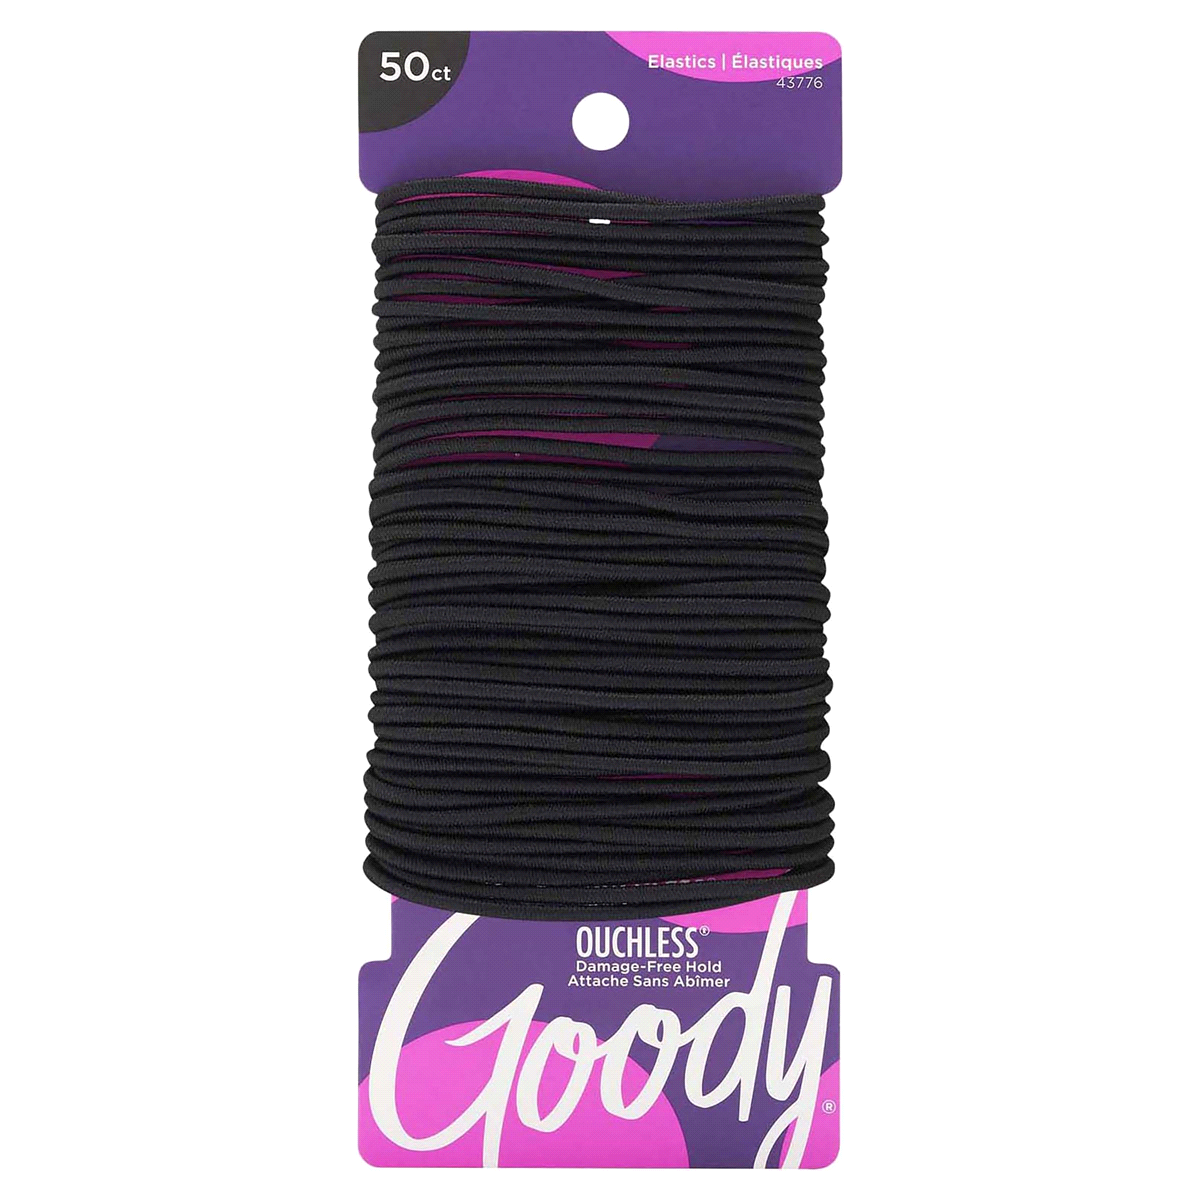 slide 1 of 1, Goody Ouchless Black Elastics, 50 ct